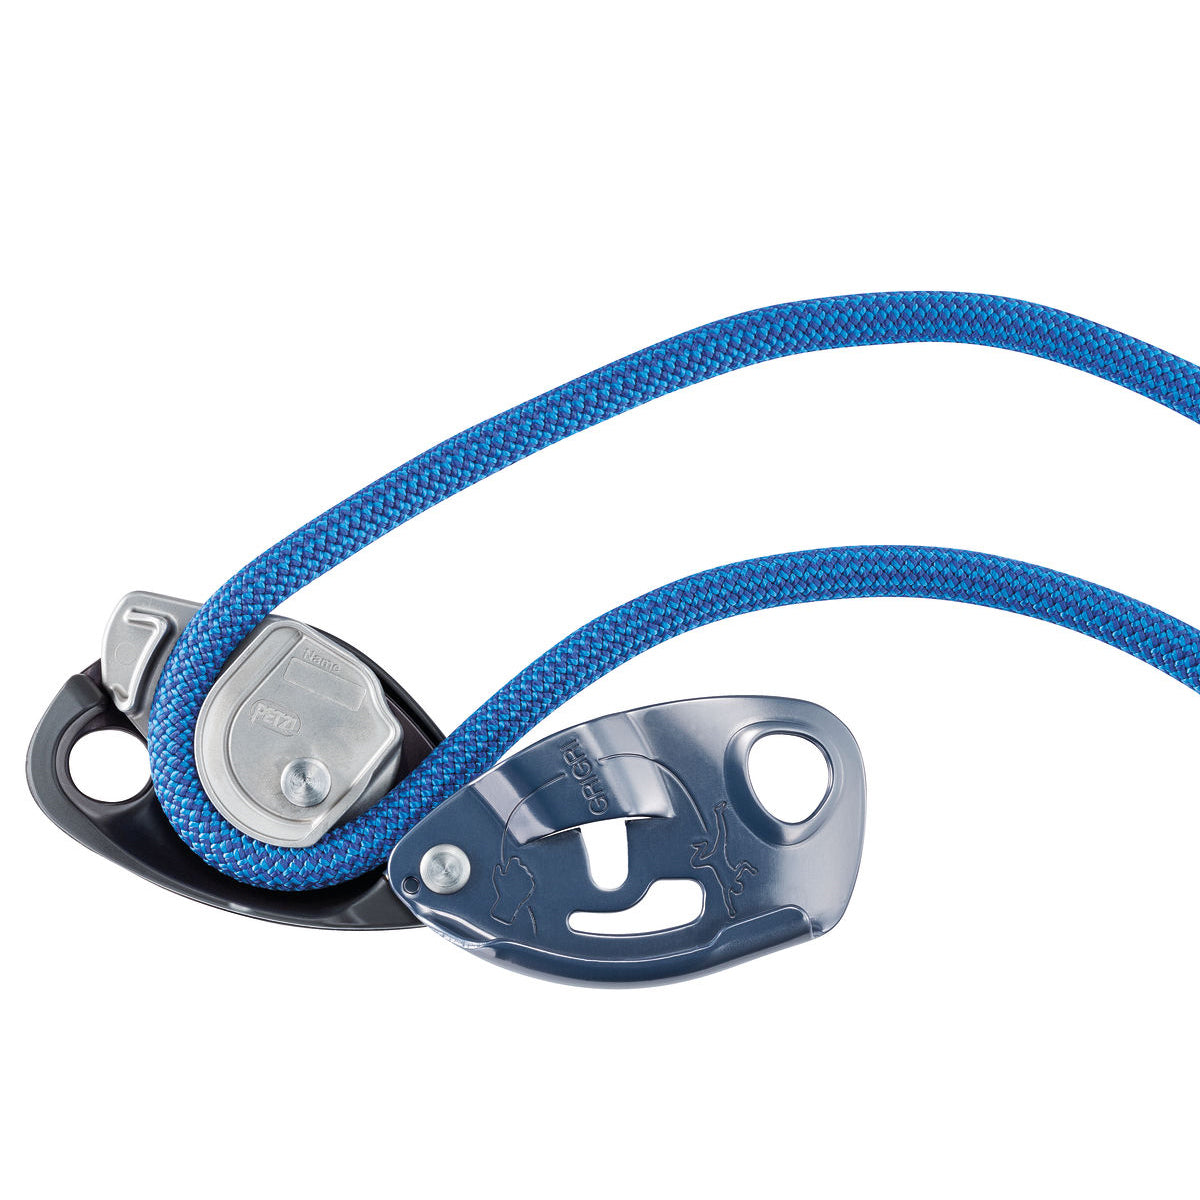 The petzl grigri open, with rope being inserted